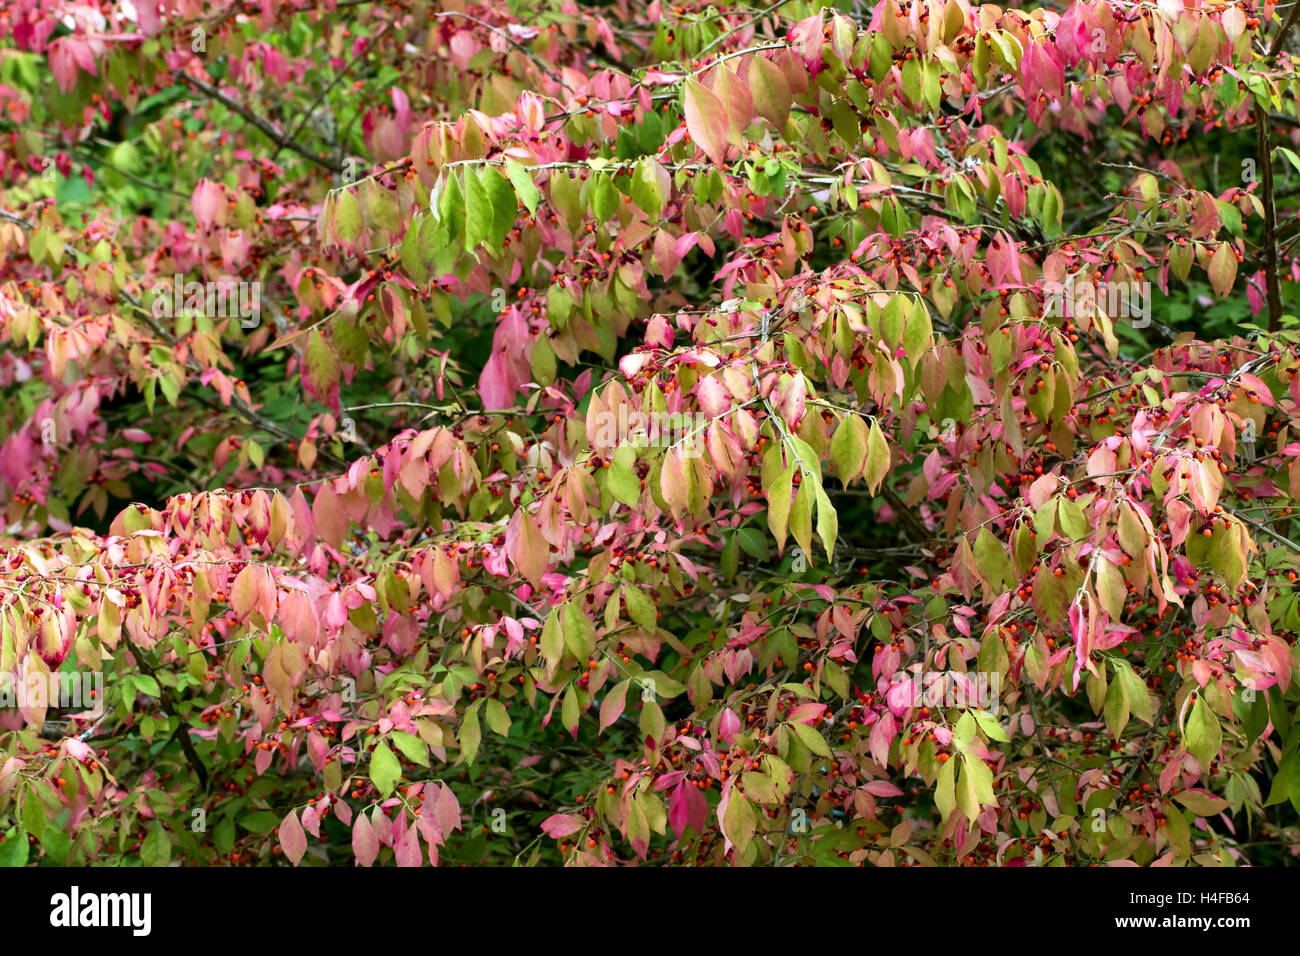 Background autumn image with pink and green leaves and smell red berries Stock Photo